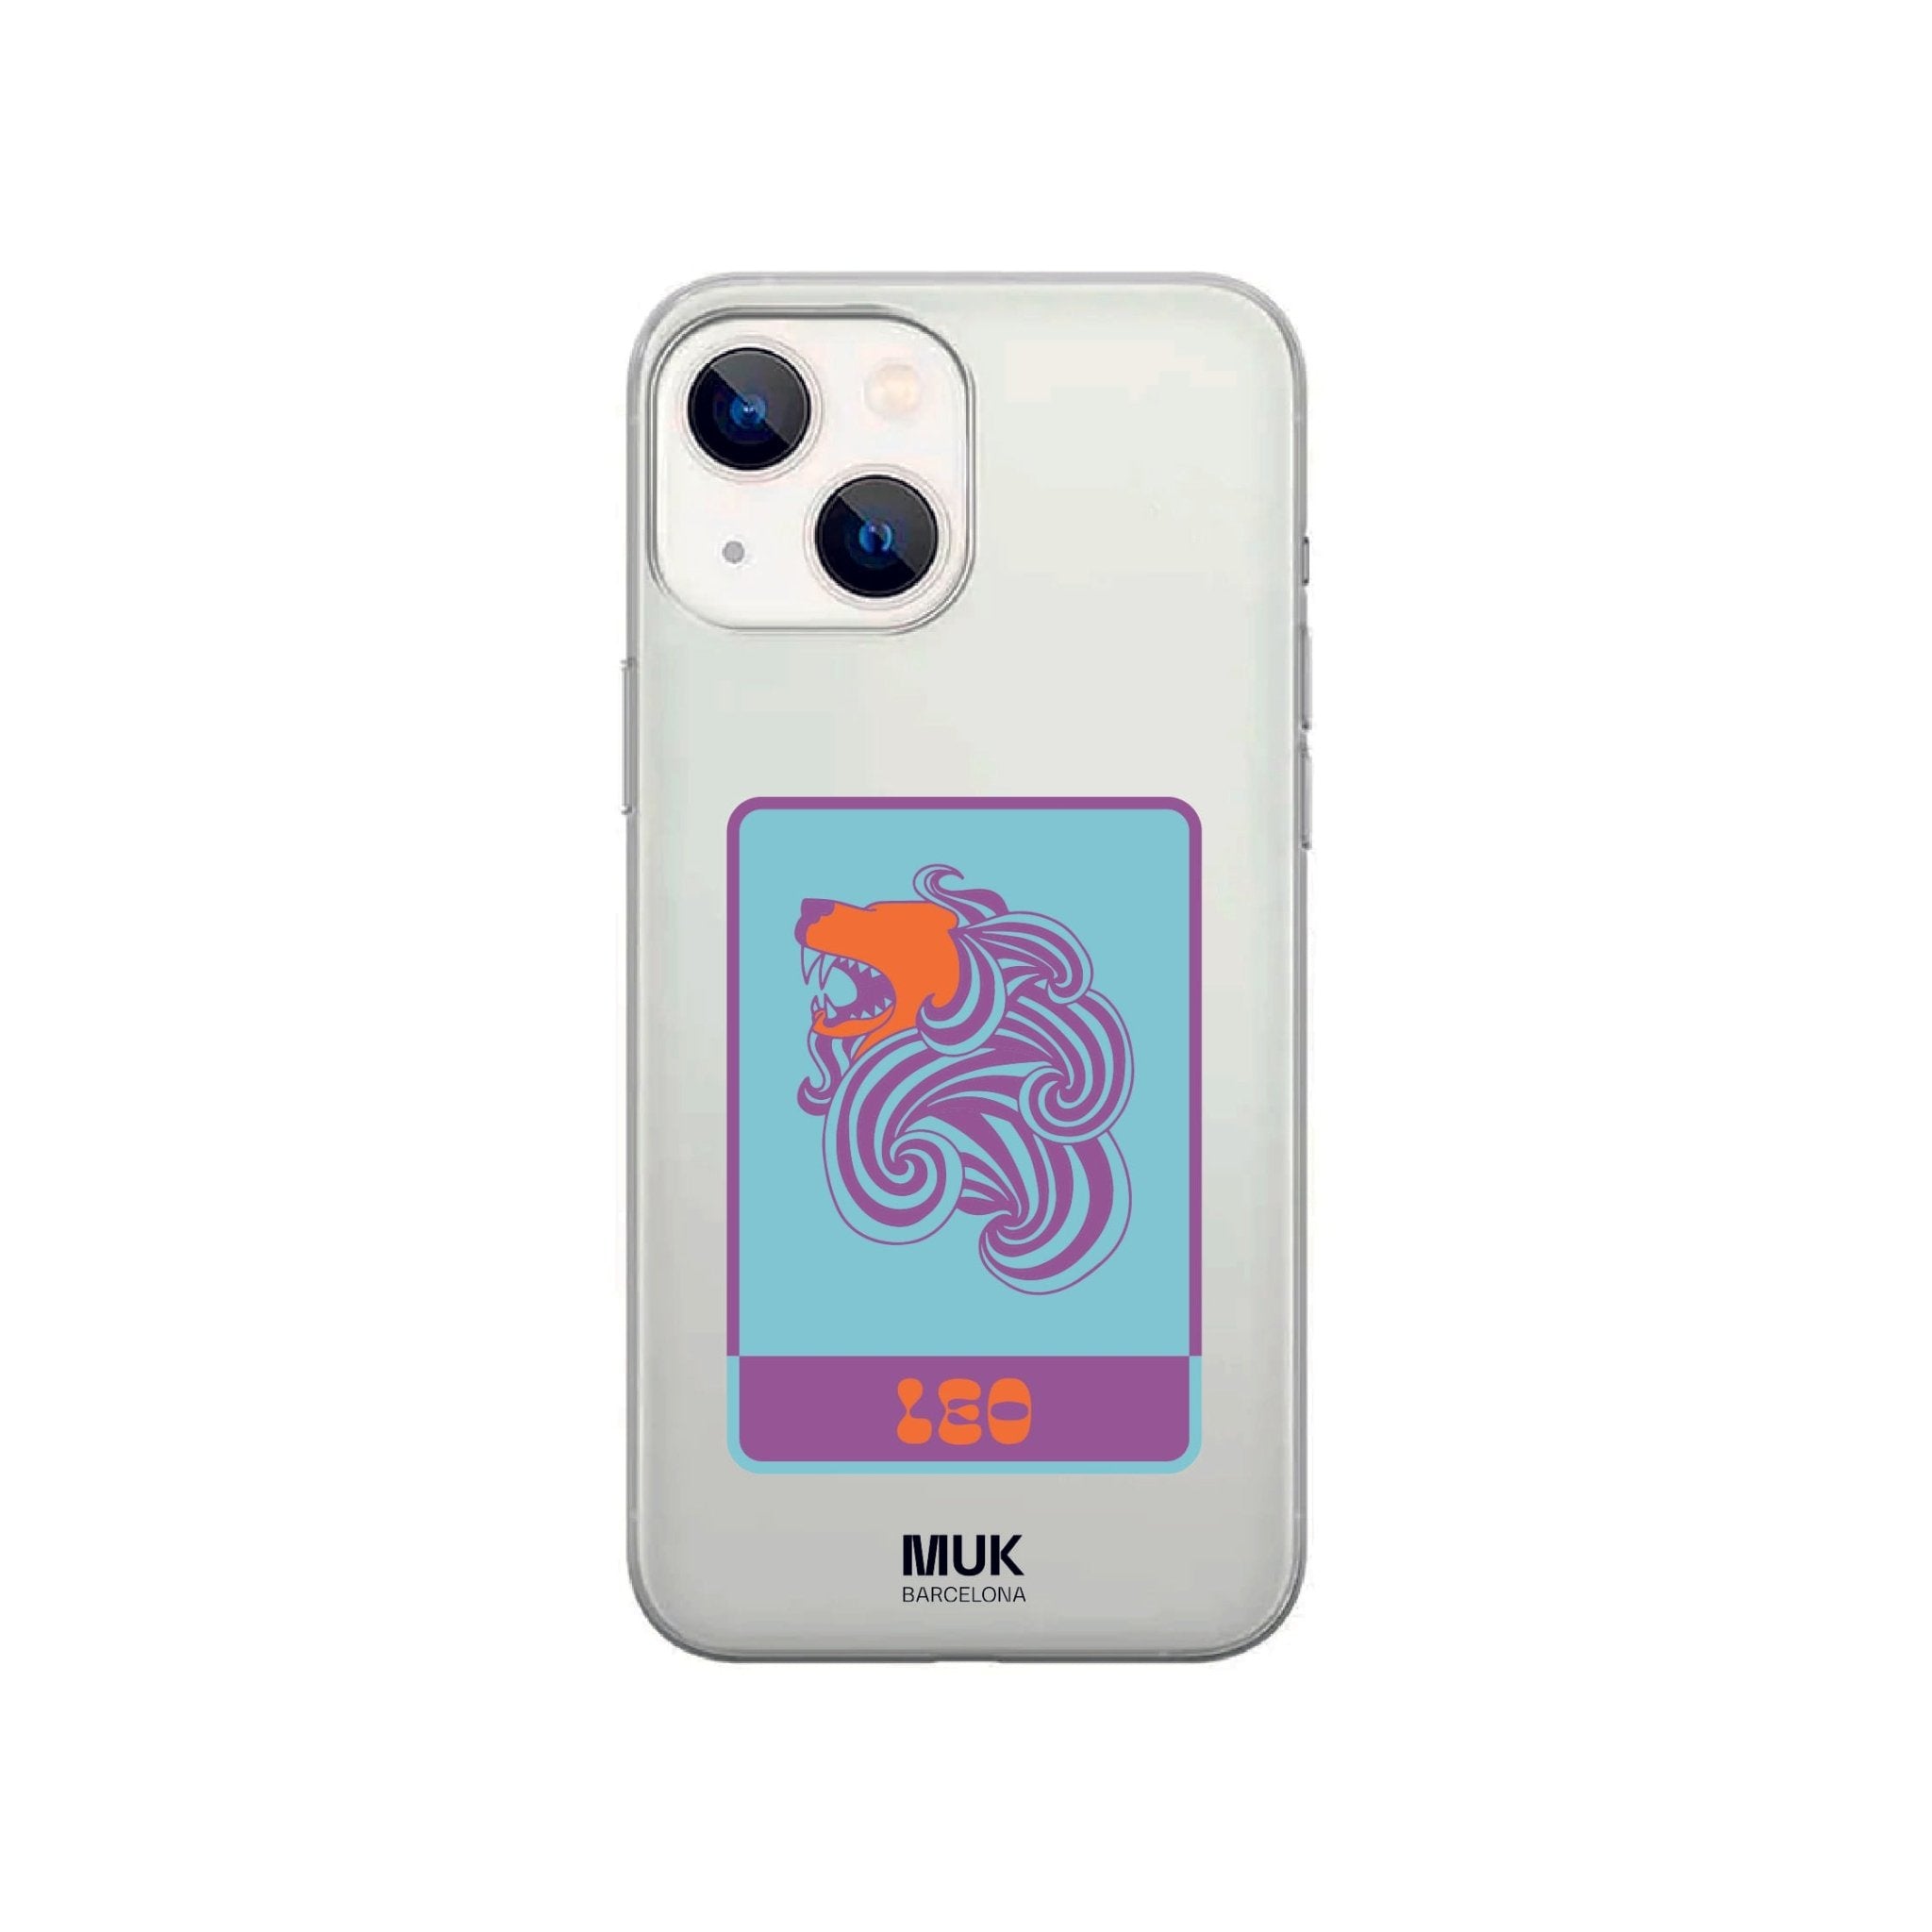 Clear phone case with Leo zodiac sign in sky blue, lilac and orange.
